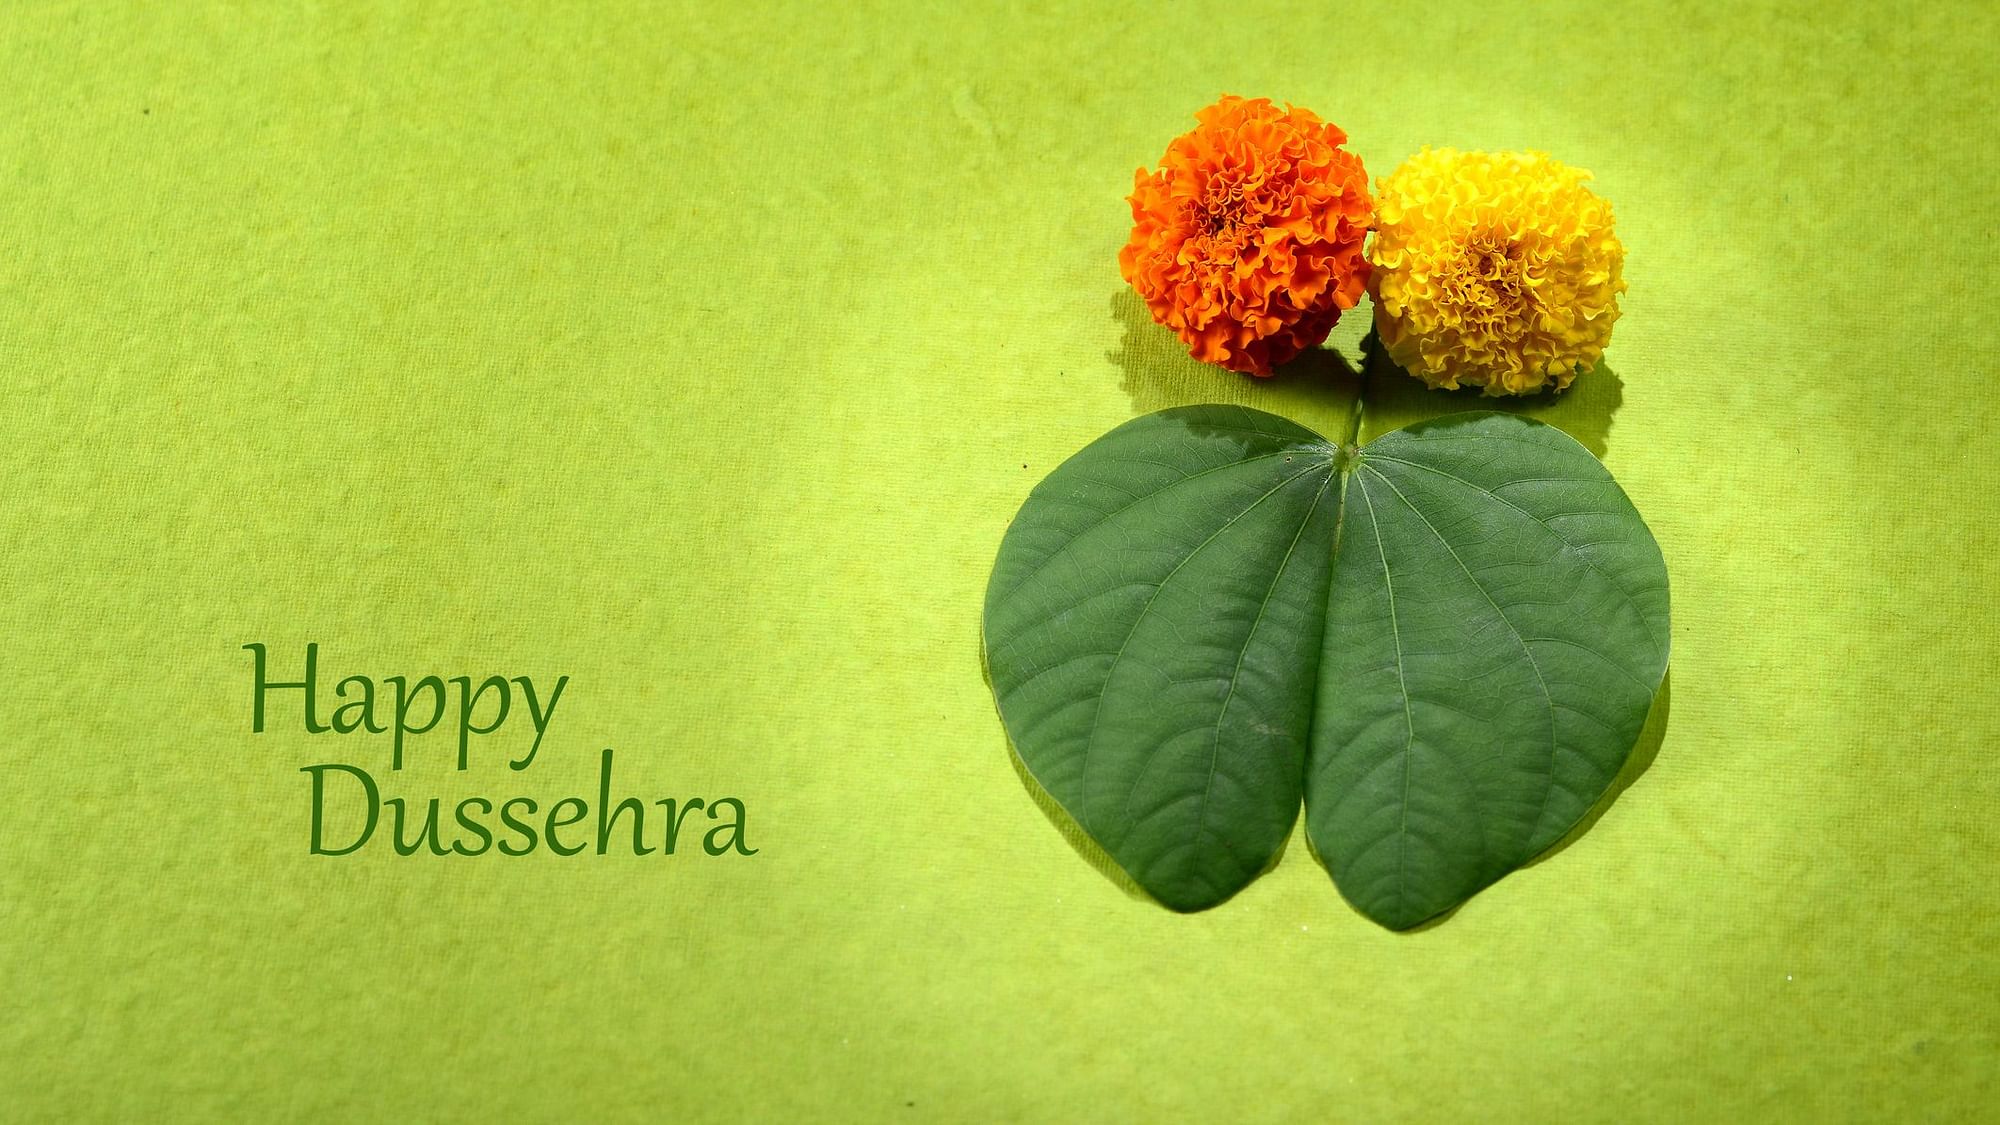 Dussehra/Vijayadashami 2020 Wishes, Greetings, Images with Quotes.